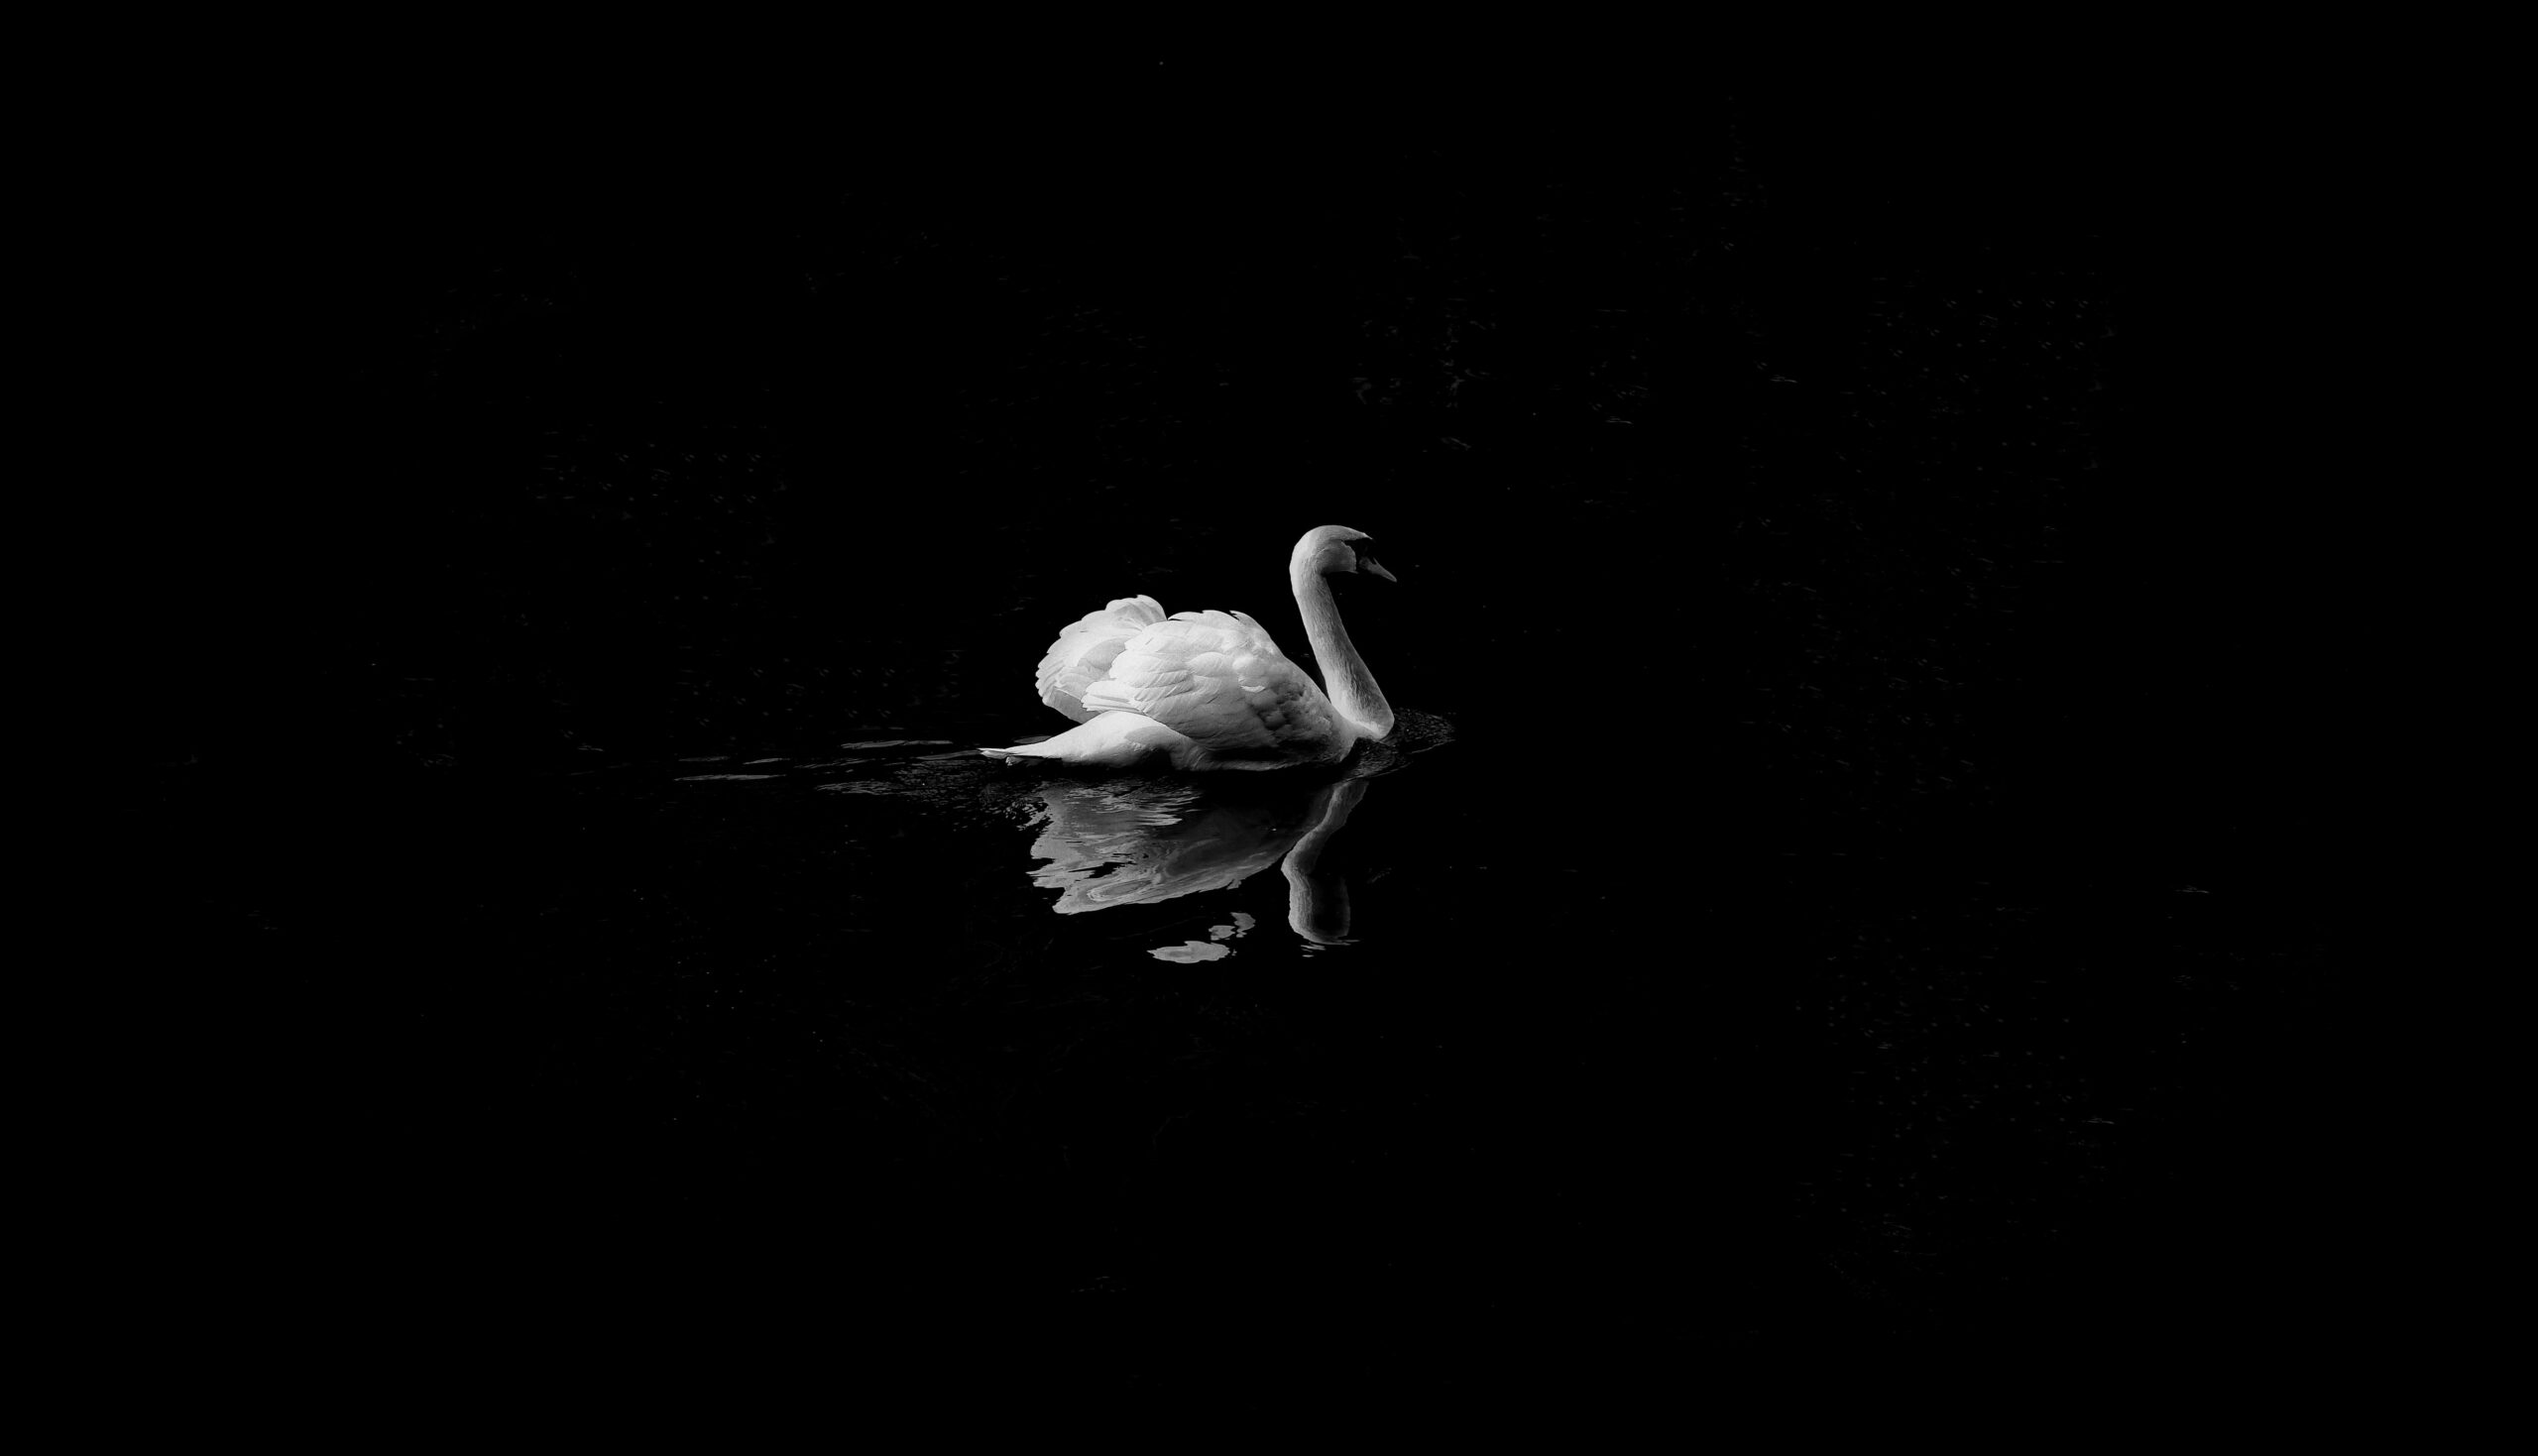 The Swan | The Being Project